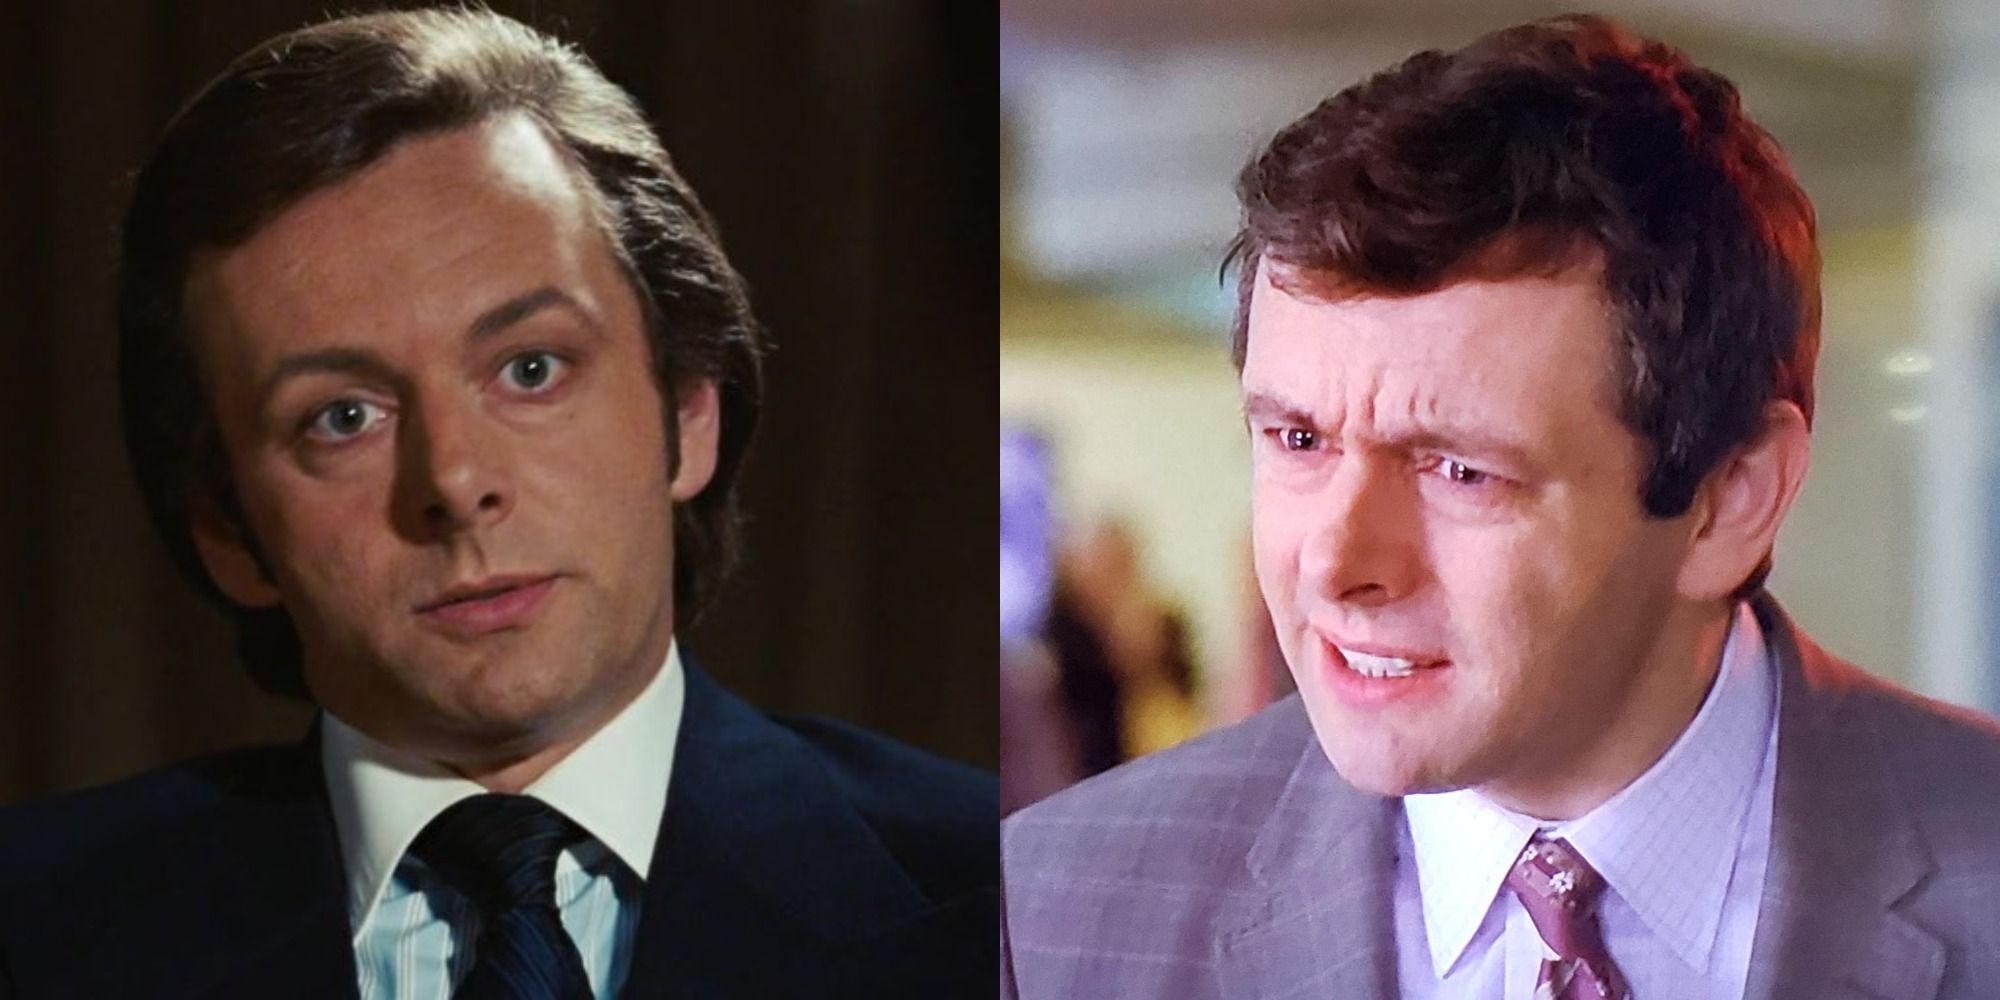 Best Michael Sheen Roles Ranked According To Imdb